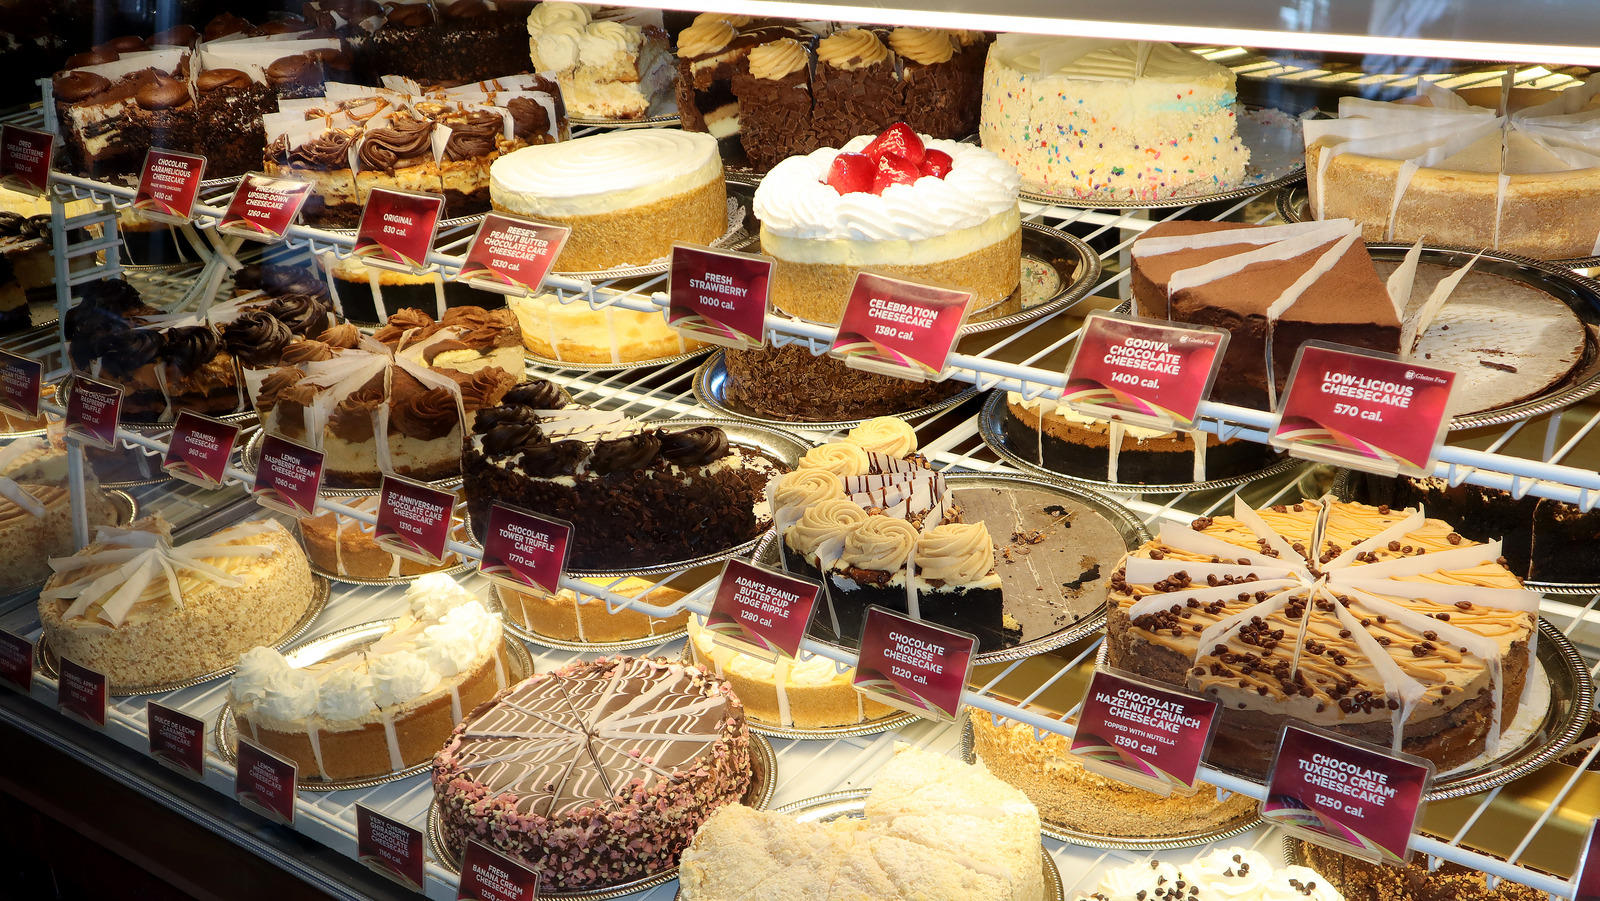 How Long Does The Cheesecake Factory's Cheesecake Typically Last In The Fridge?